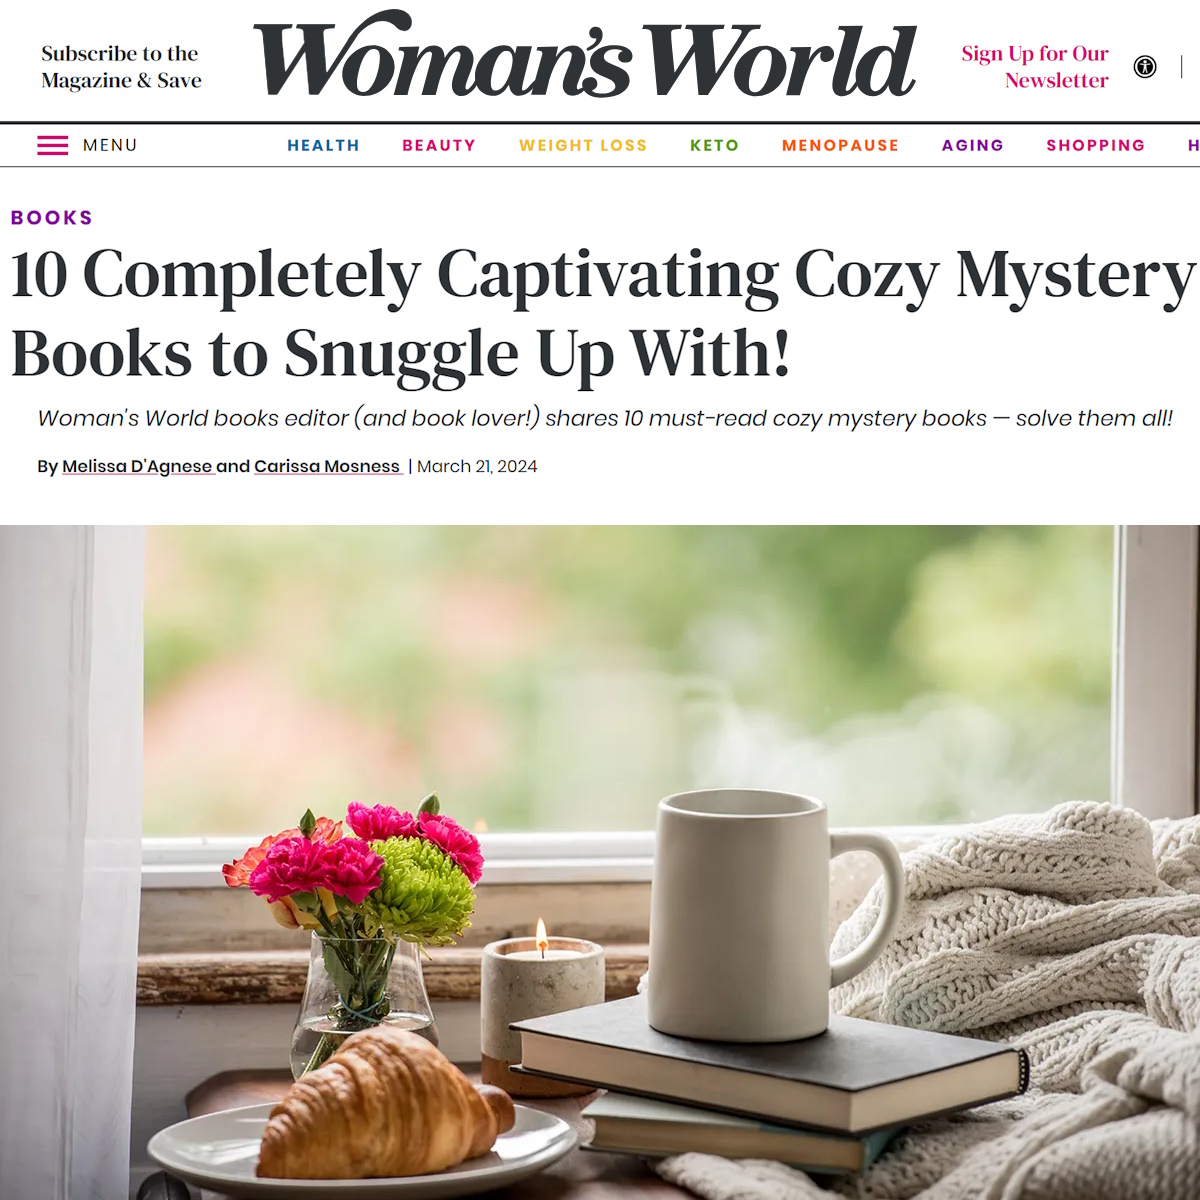 A FATAL GROOVE is named one of Woman's World '10 Completely Captivating Cozy Mystery Books to Snuggle Up With!' along with @AuthorPaige, @AbbyVandiver, Laura Childs, @MPMtheWriter, Sofie Ryan, @vickidelany, @JenJChow, Mindy Quigley & @tonyakappes11 womansworld.com/posts/books/be…